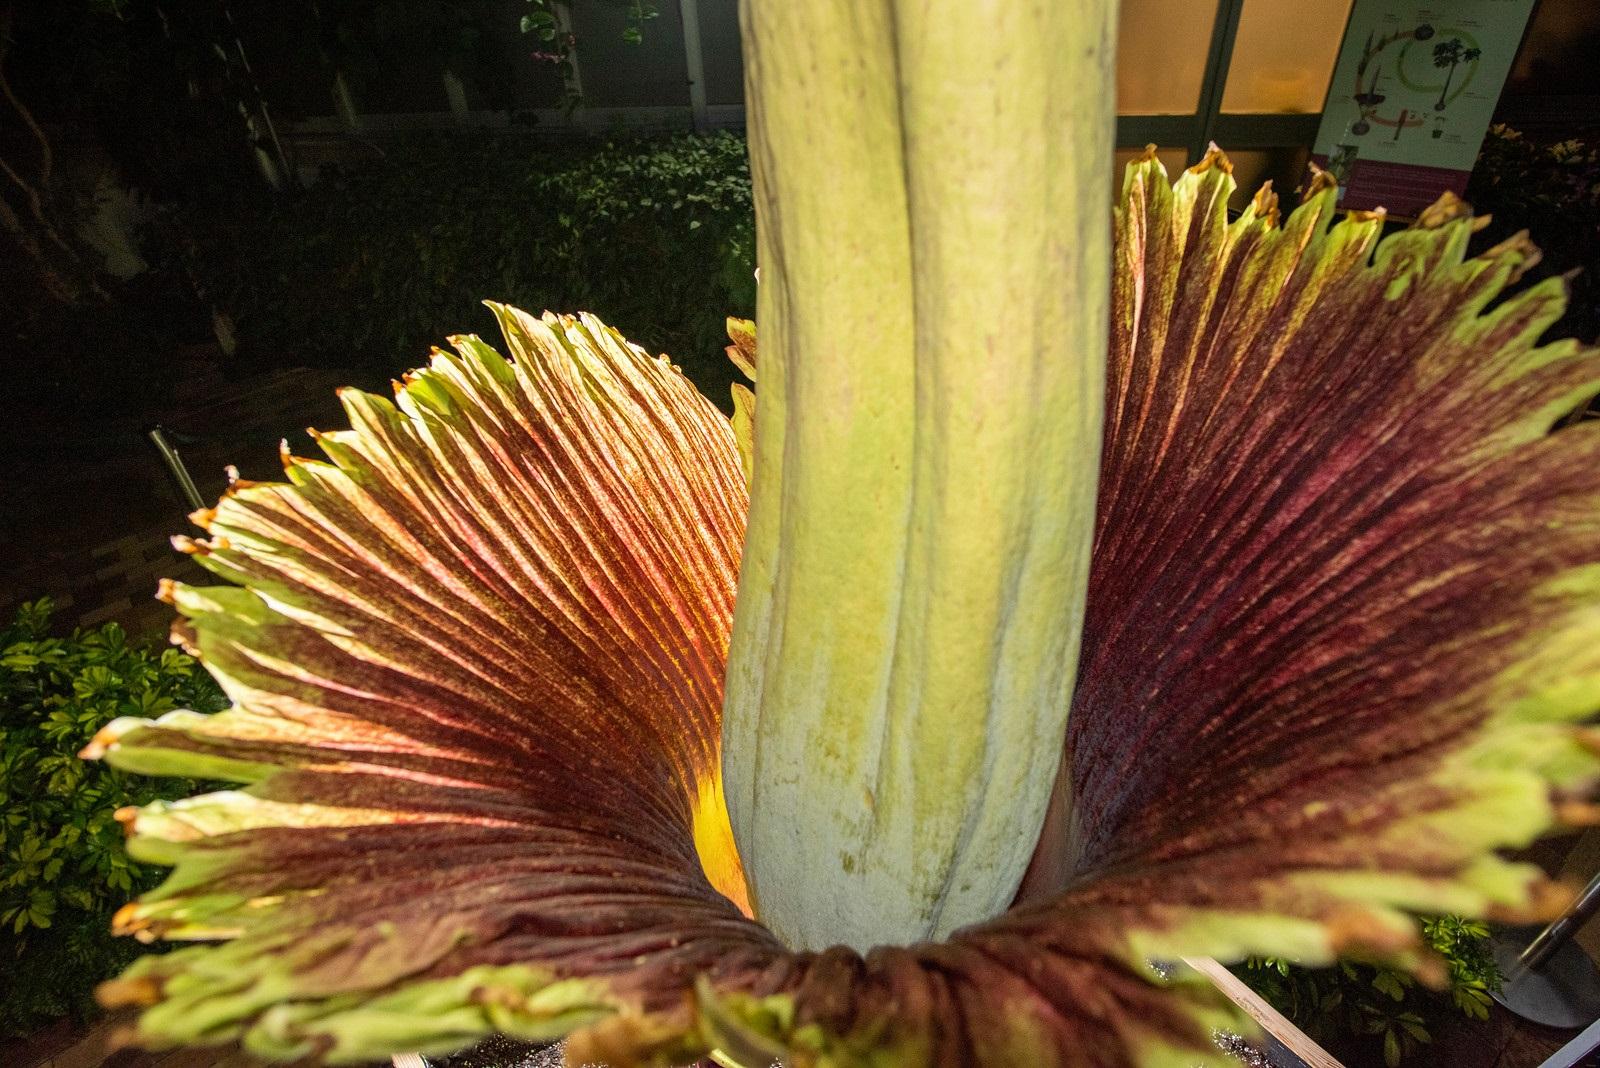 The inside of Java the corpse flower after it bloomed on May 23, 2019. (Courtesy Chicago Botanic Garden) 